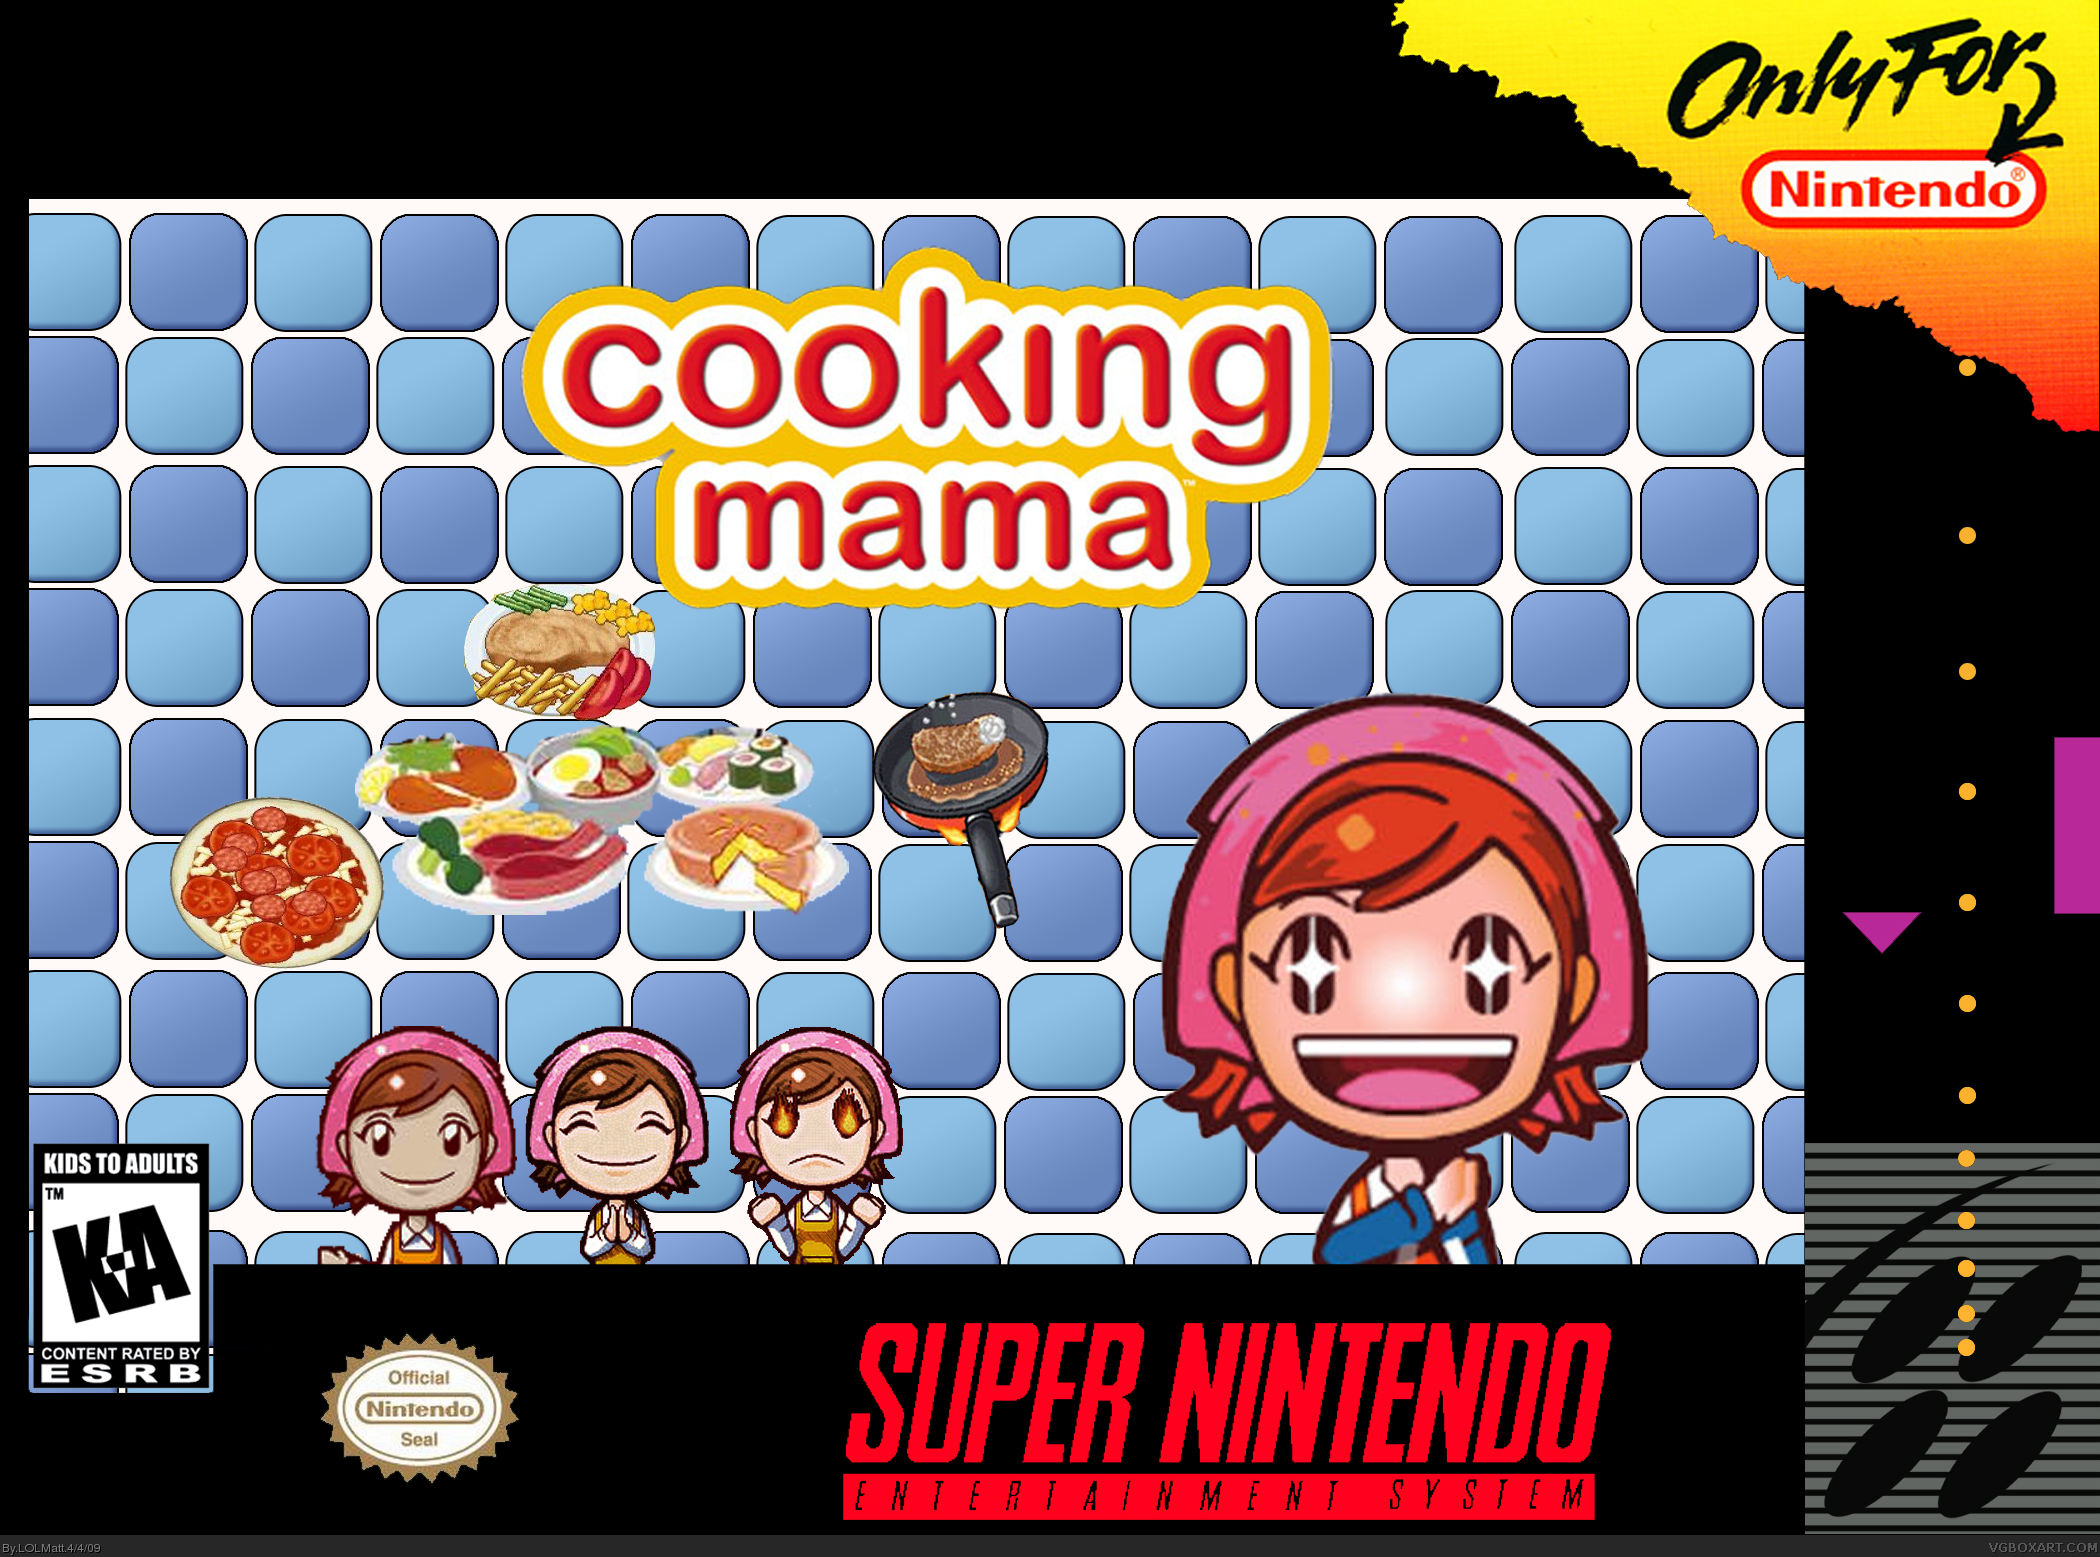 Cooking Mama box cover